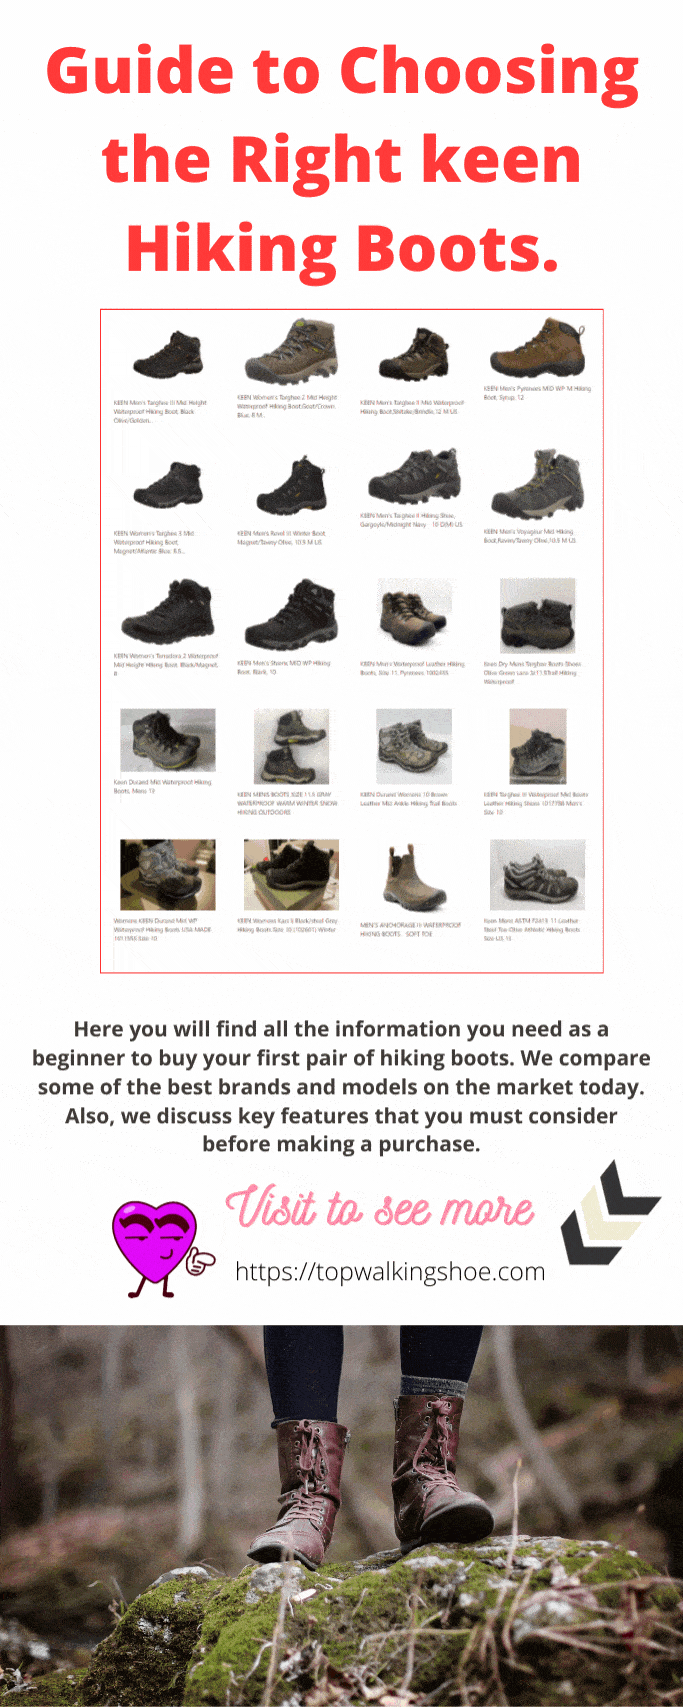 Choosing the Right keen Hiking Boots.